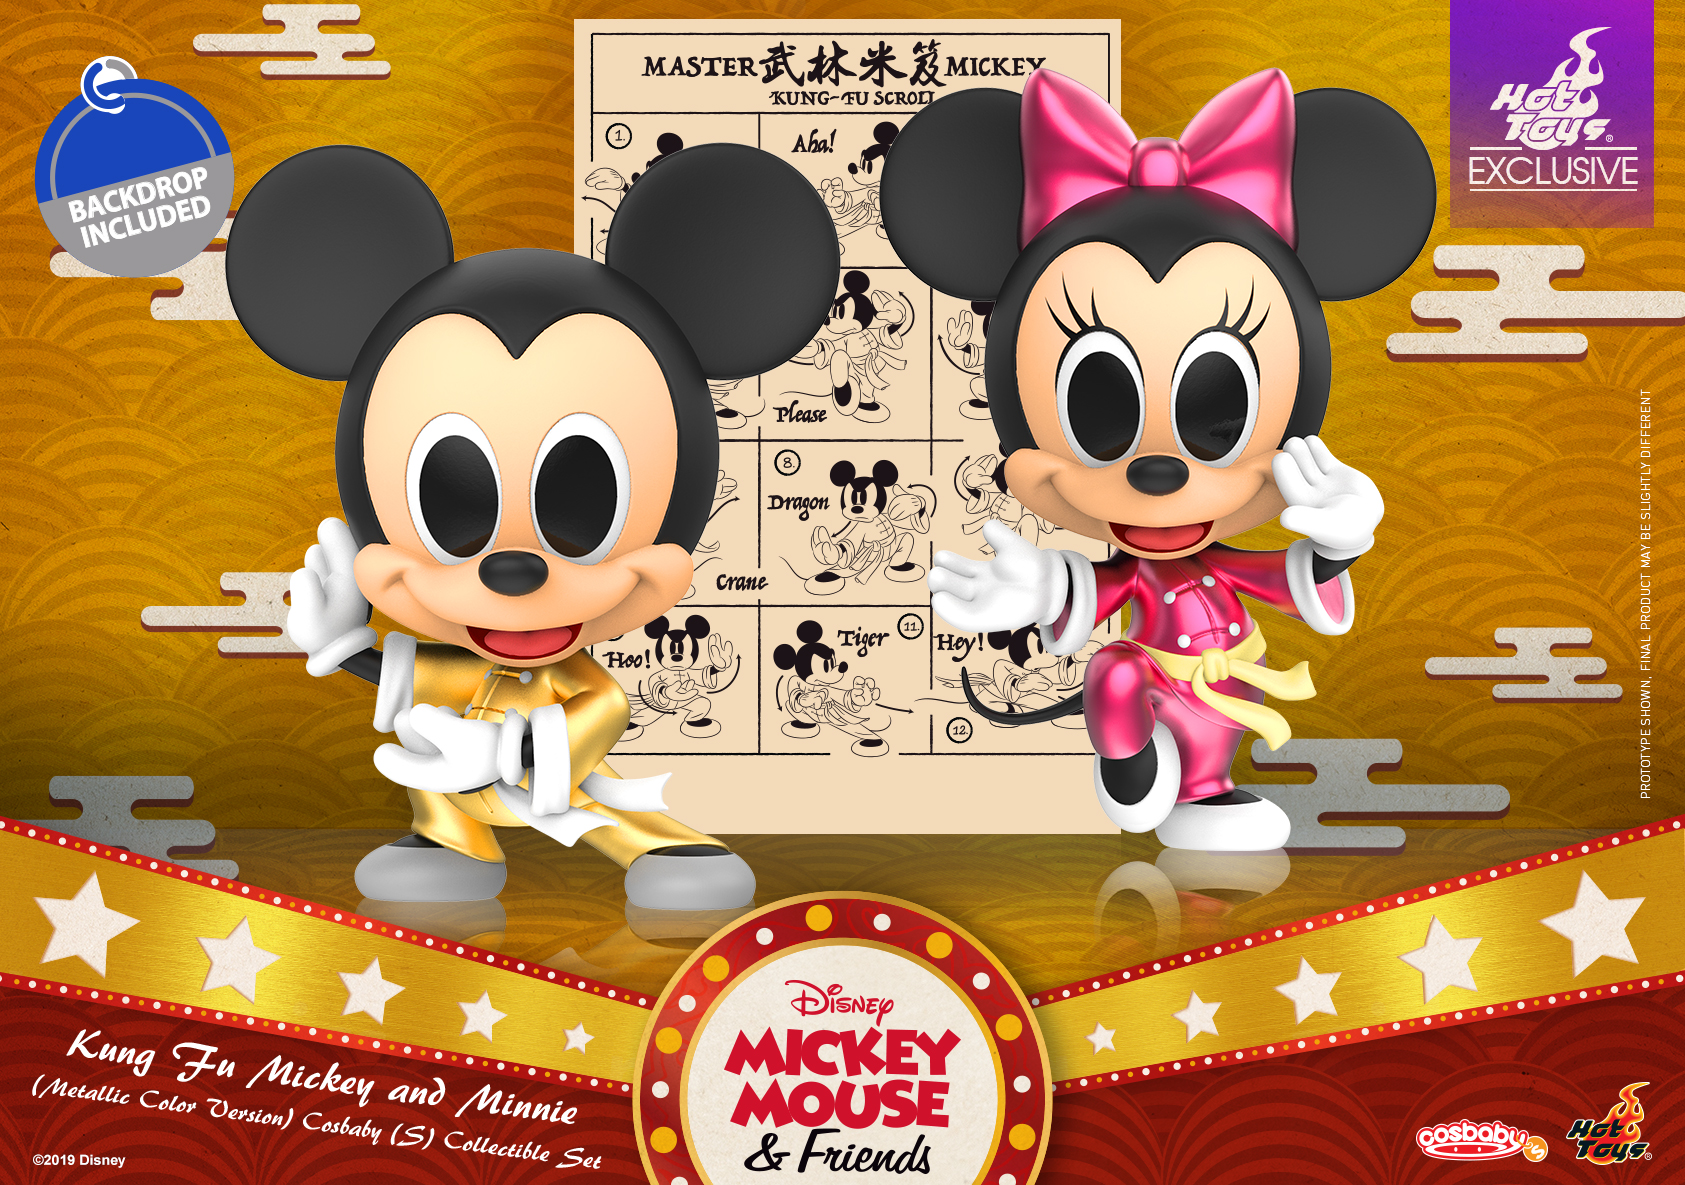 Hot Toys - Mickey Mouse and Friends - Kung Fu Mickey (Metallic Color) Cosbaby Set_PR1